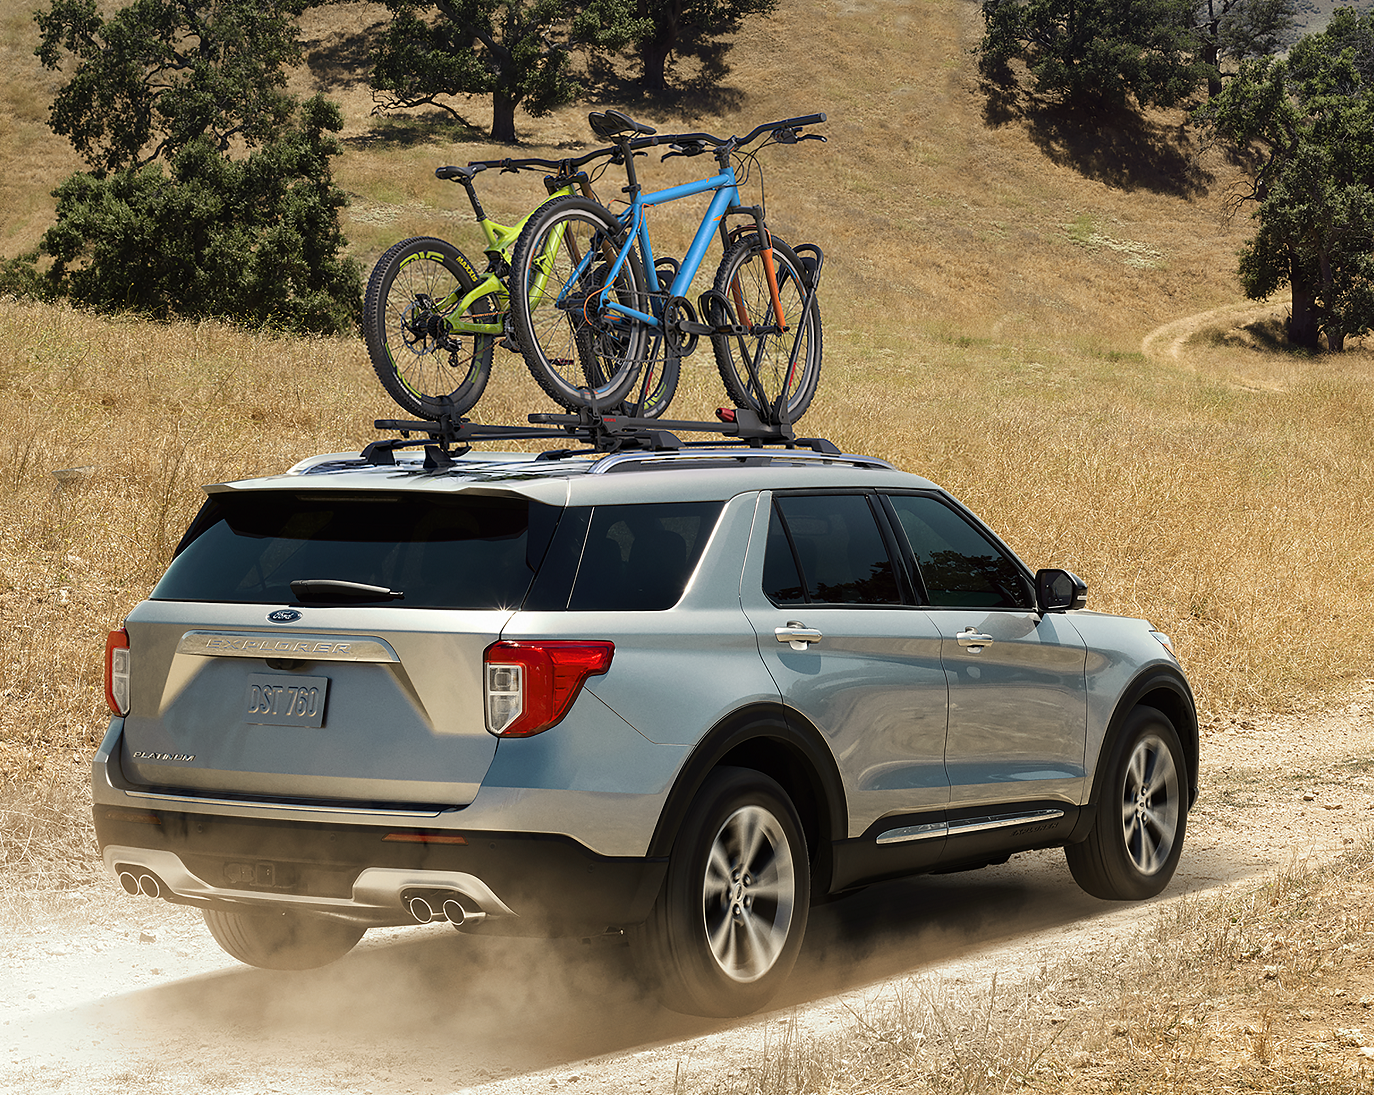 2021 Ford Explorer Review Waldorf MD
